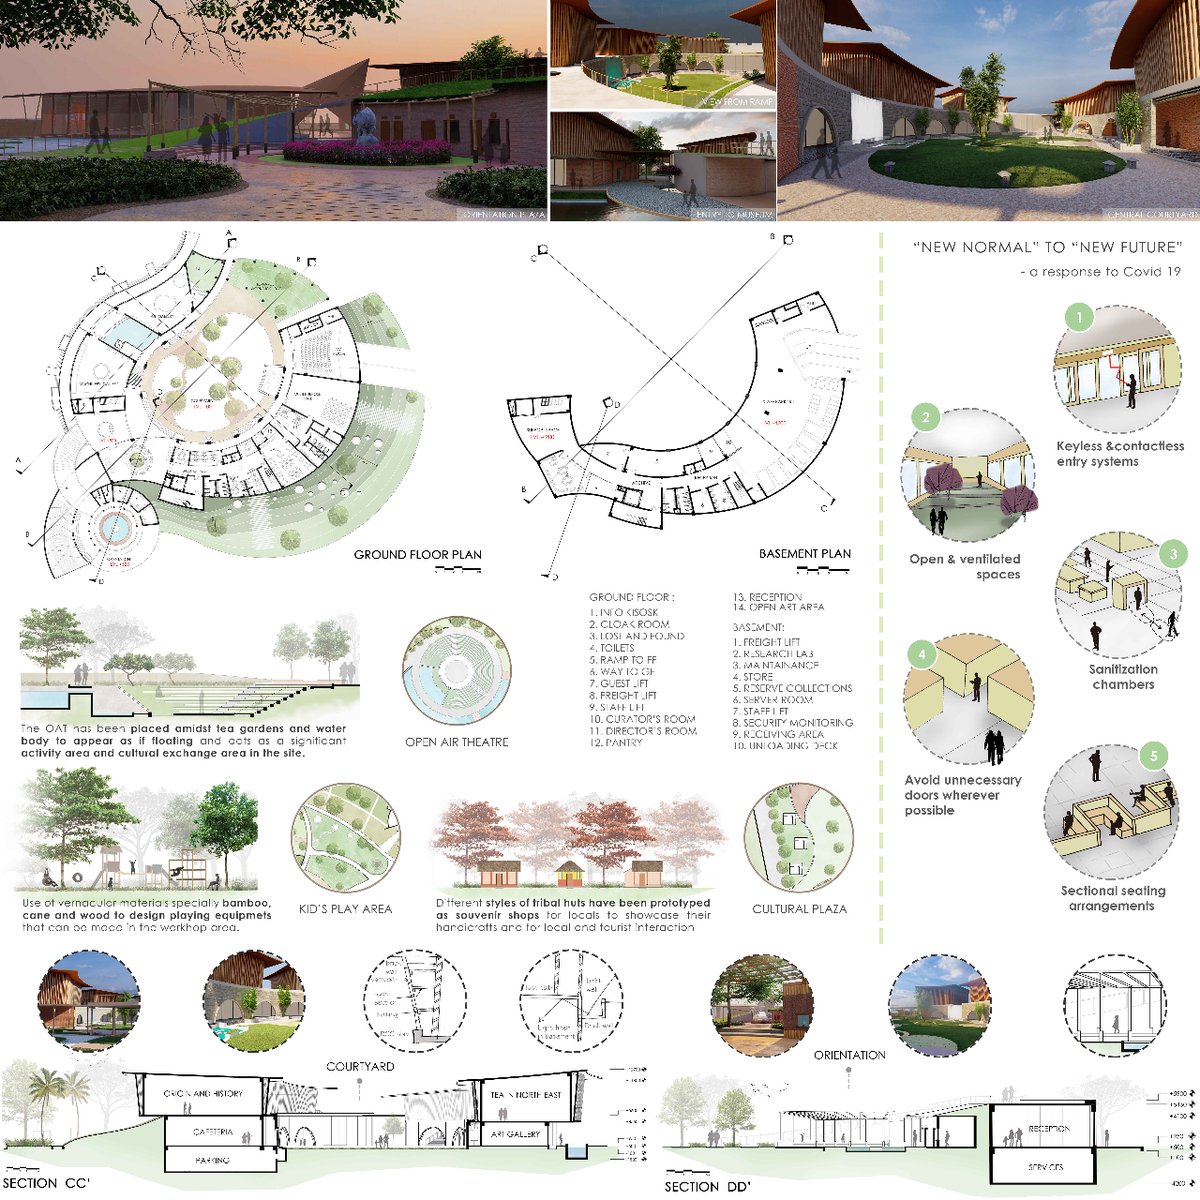 Interactive Tea Museum
Preethika Agarwal
India

#architecturecompetitions #archiol #architecturethesis #ata #architecturethesisaward #architecture #architectureape #archicontest #architecturedesign #archidaily #architecturestudent #architecturecompetition #architecturelovers